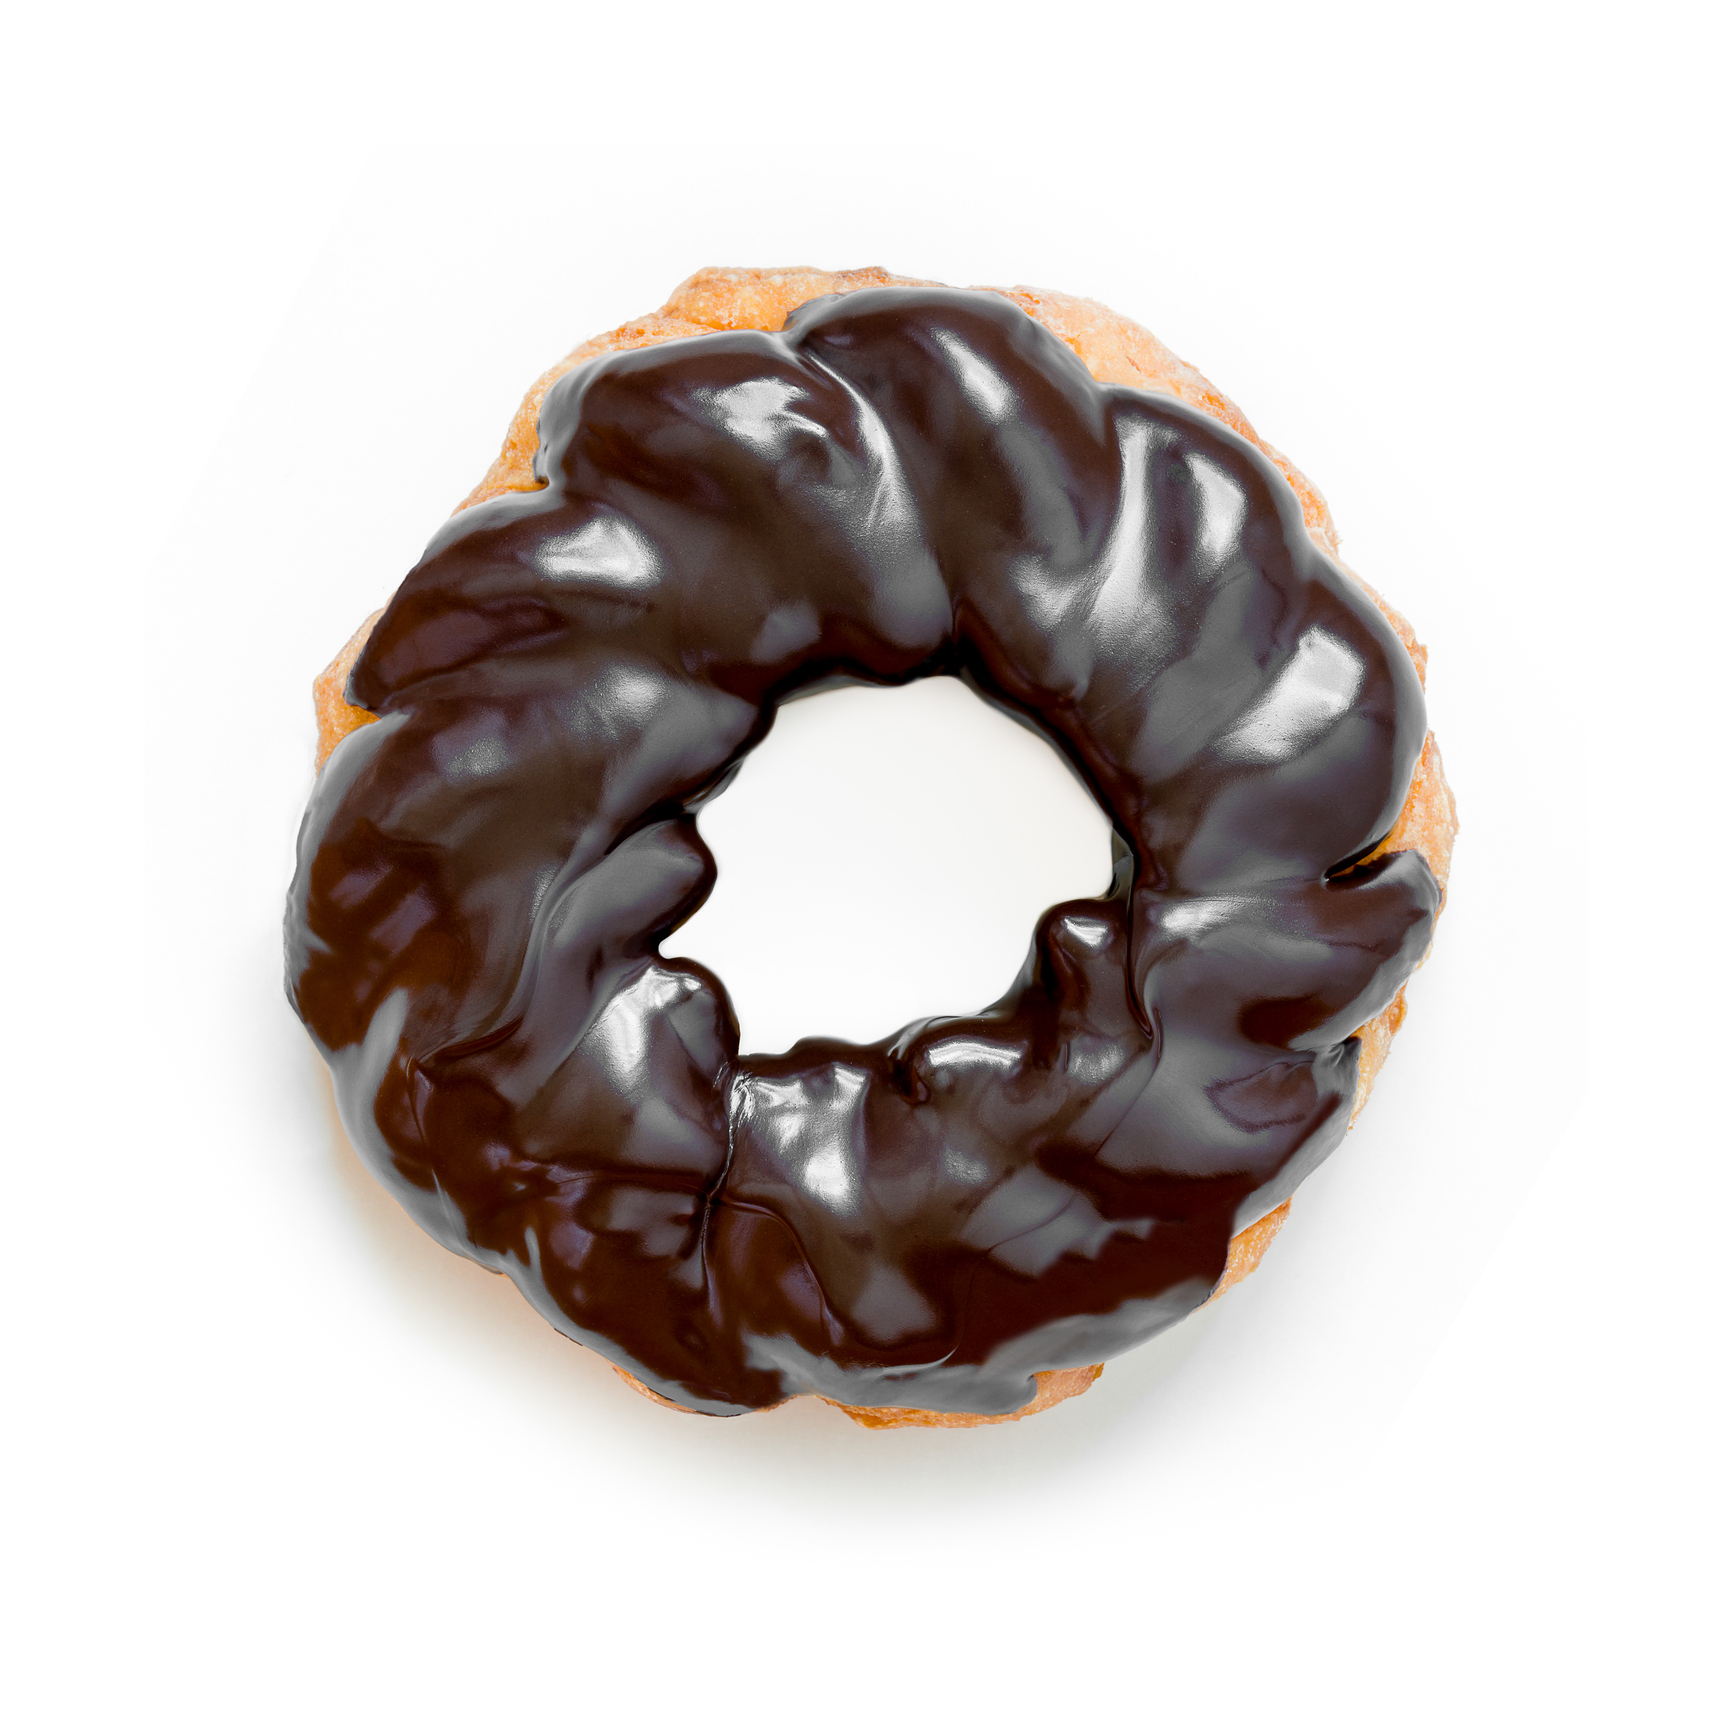 getty-cruller-image